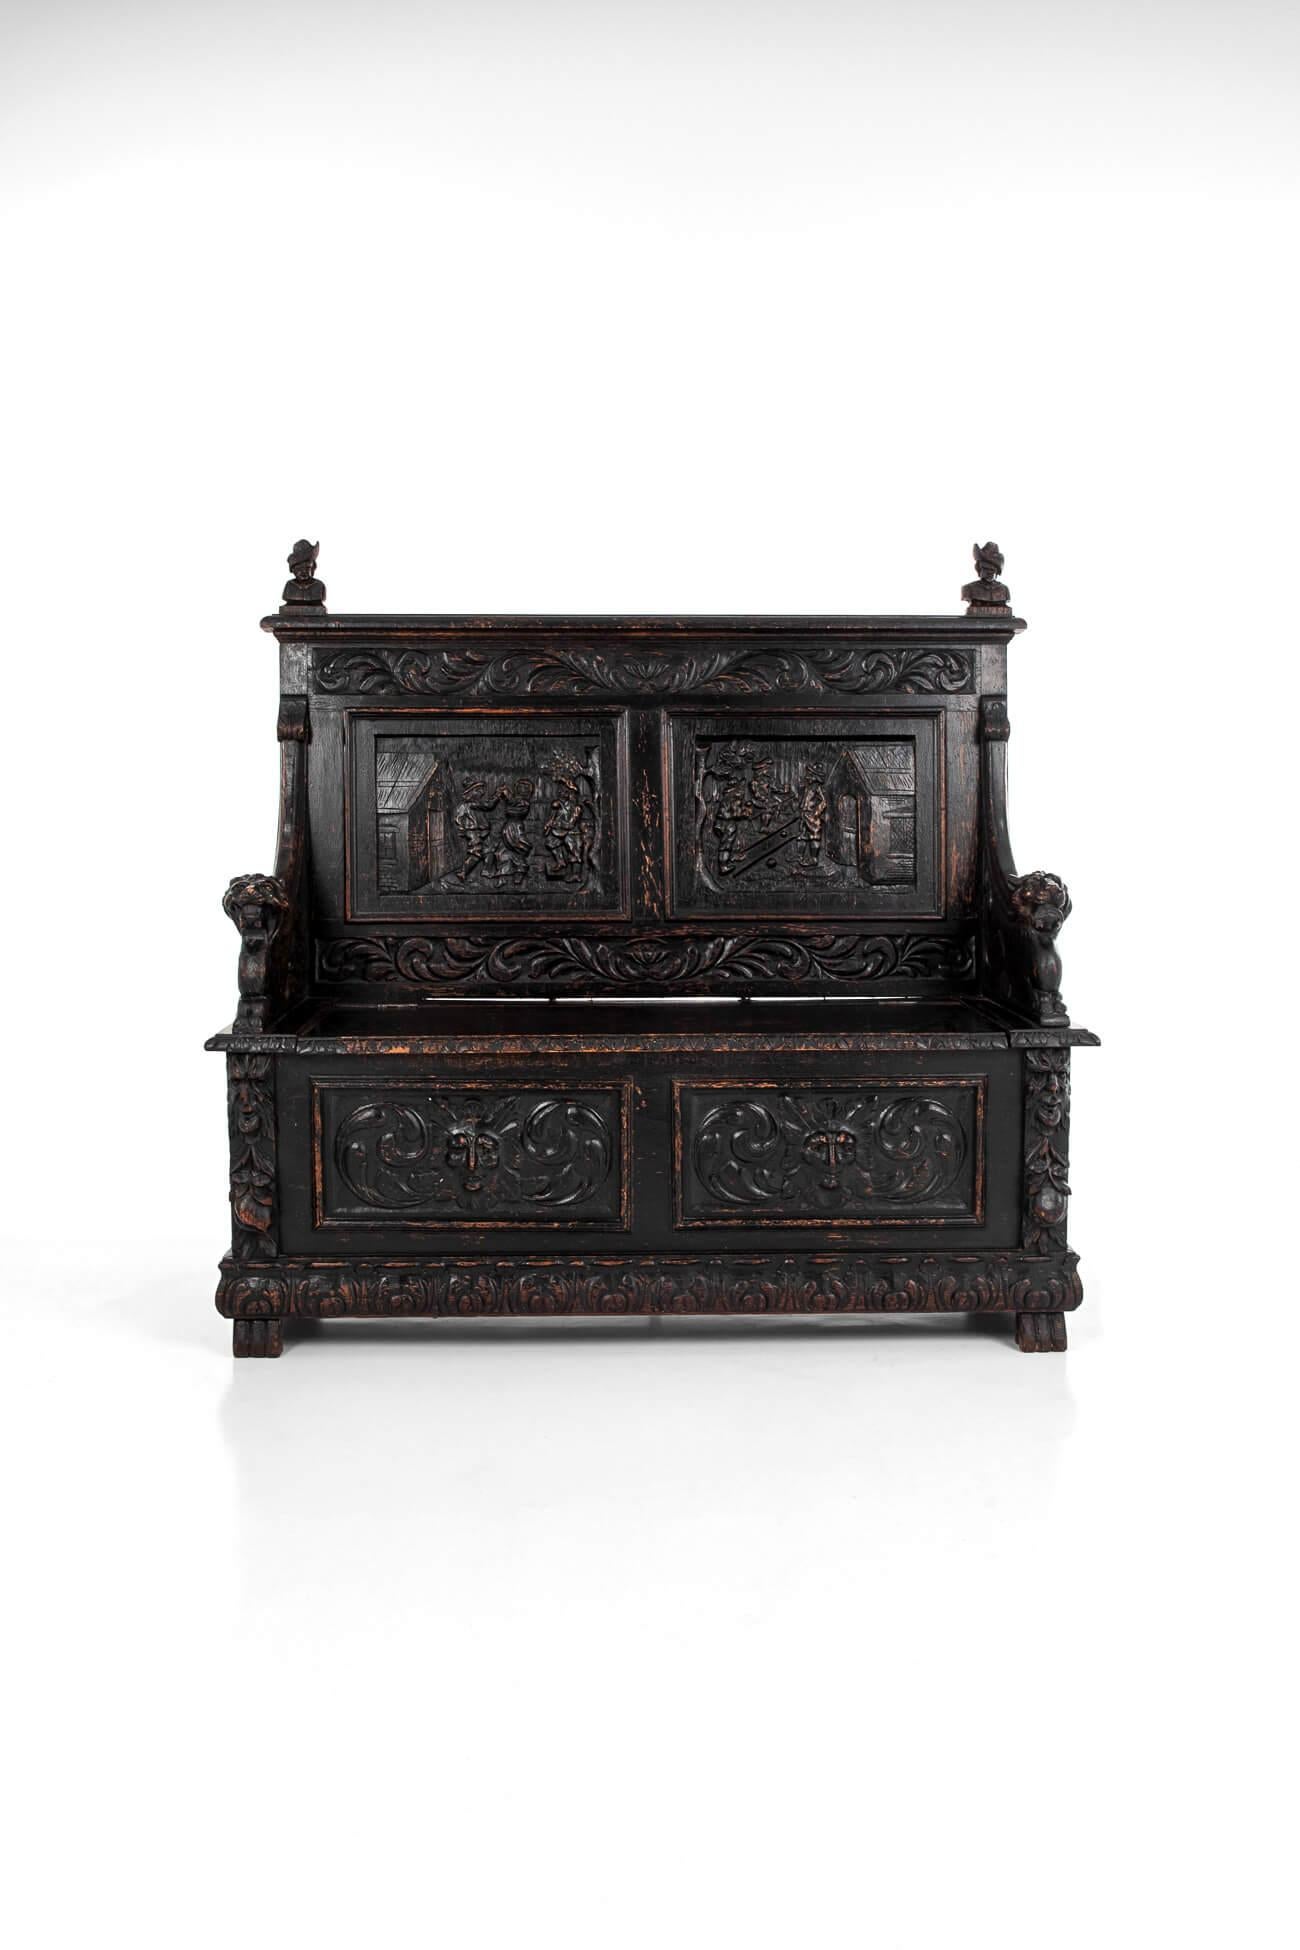 A superb German carved oak settle. Featuring two bust finials on its straight crest rail and a high seat back intricately carved with scroll motif and floral leaf surrounding two carved scenic panels. The seat, which is flanked by curved armrests